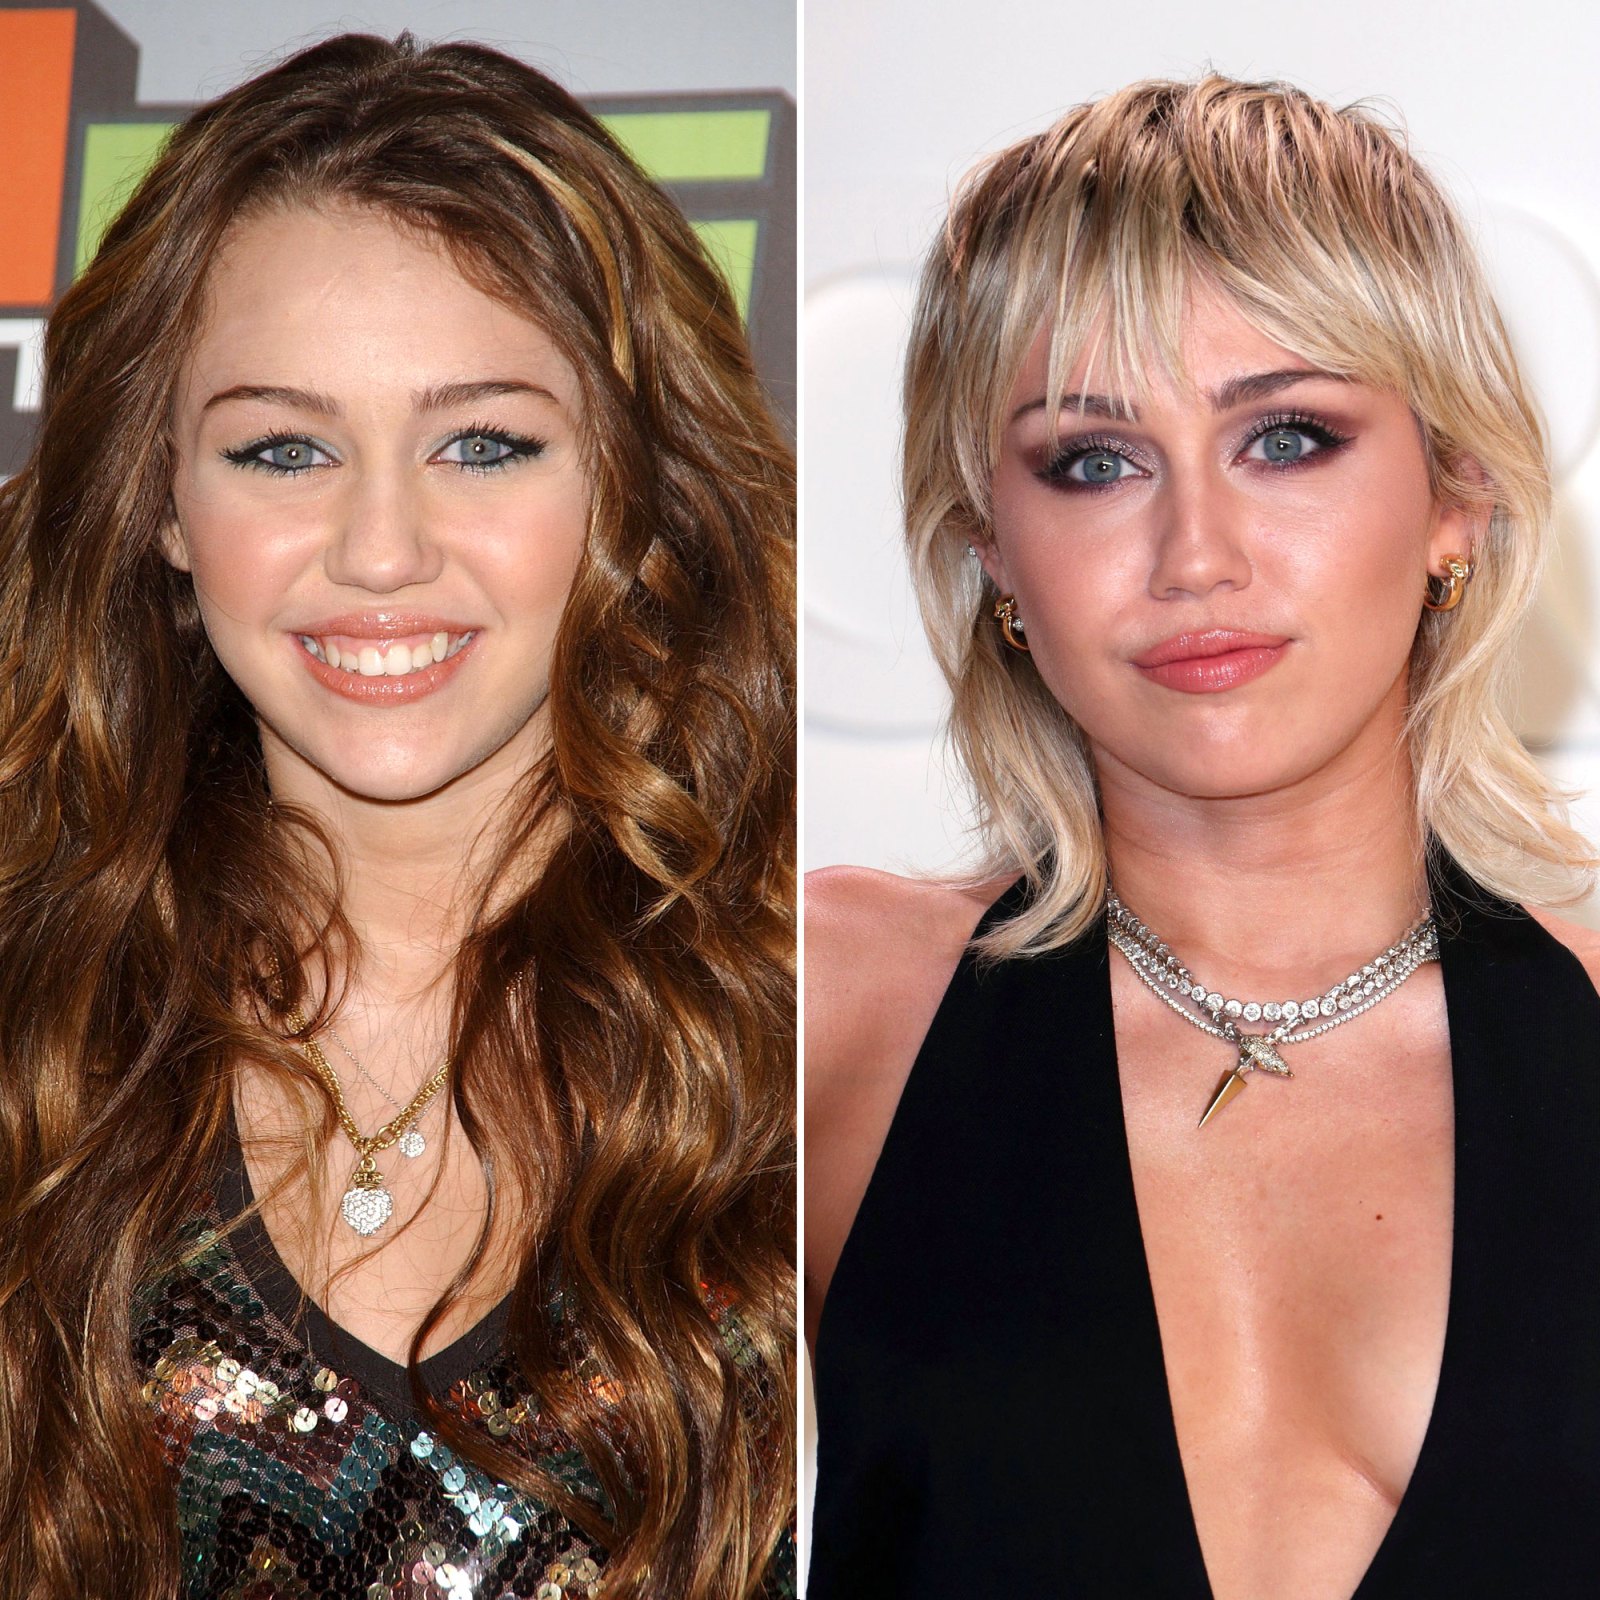 Miley Cyrus Hair Evolution Over the Years